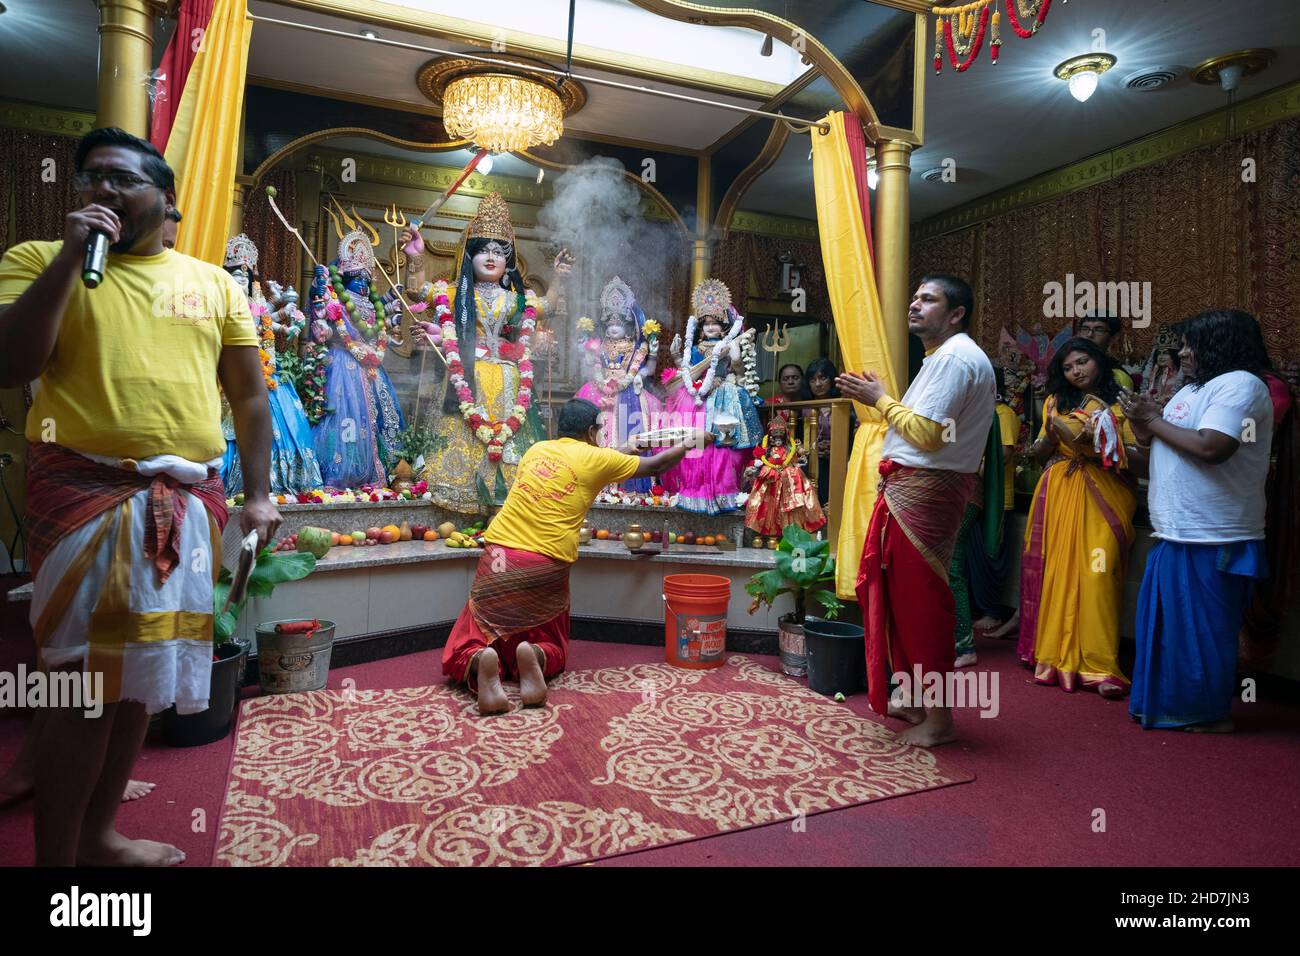 In a Hindu temple a worshipper performs the arti ritual of waving flames in front of statues of deities Stock Photo